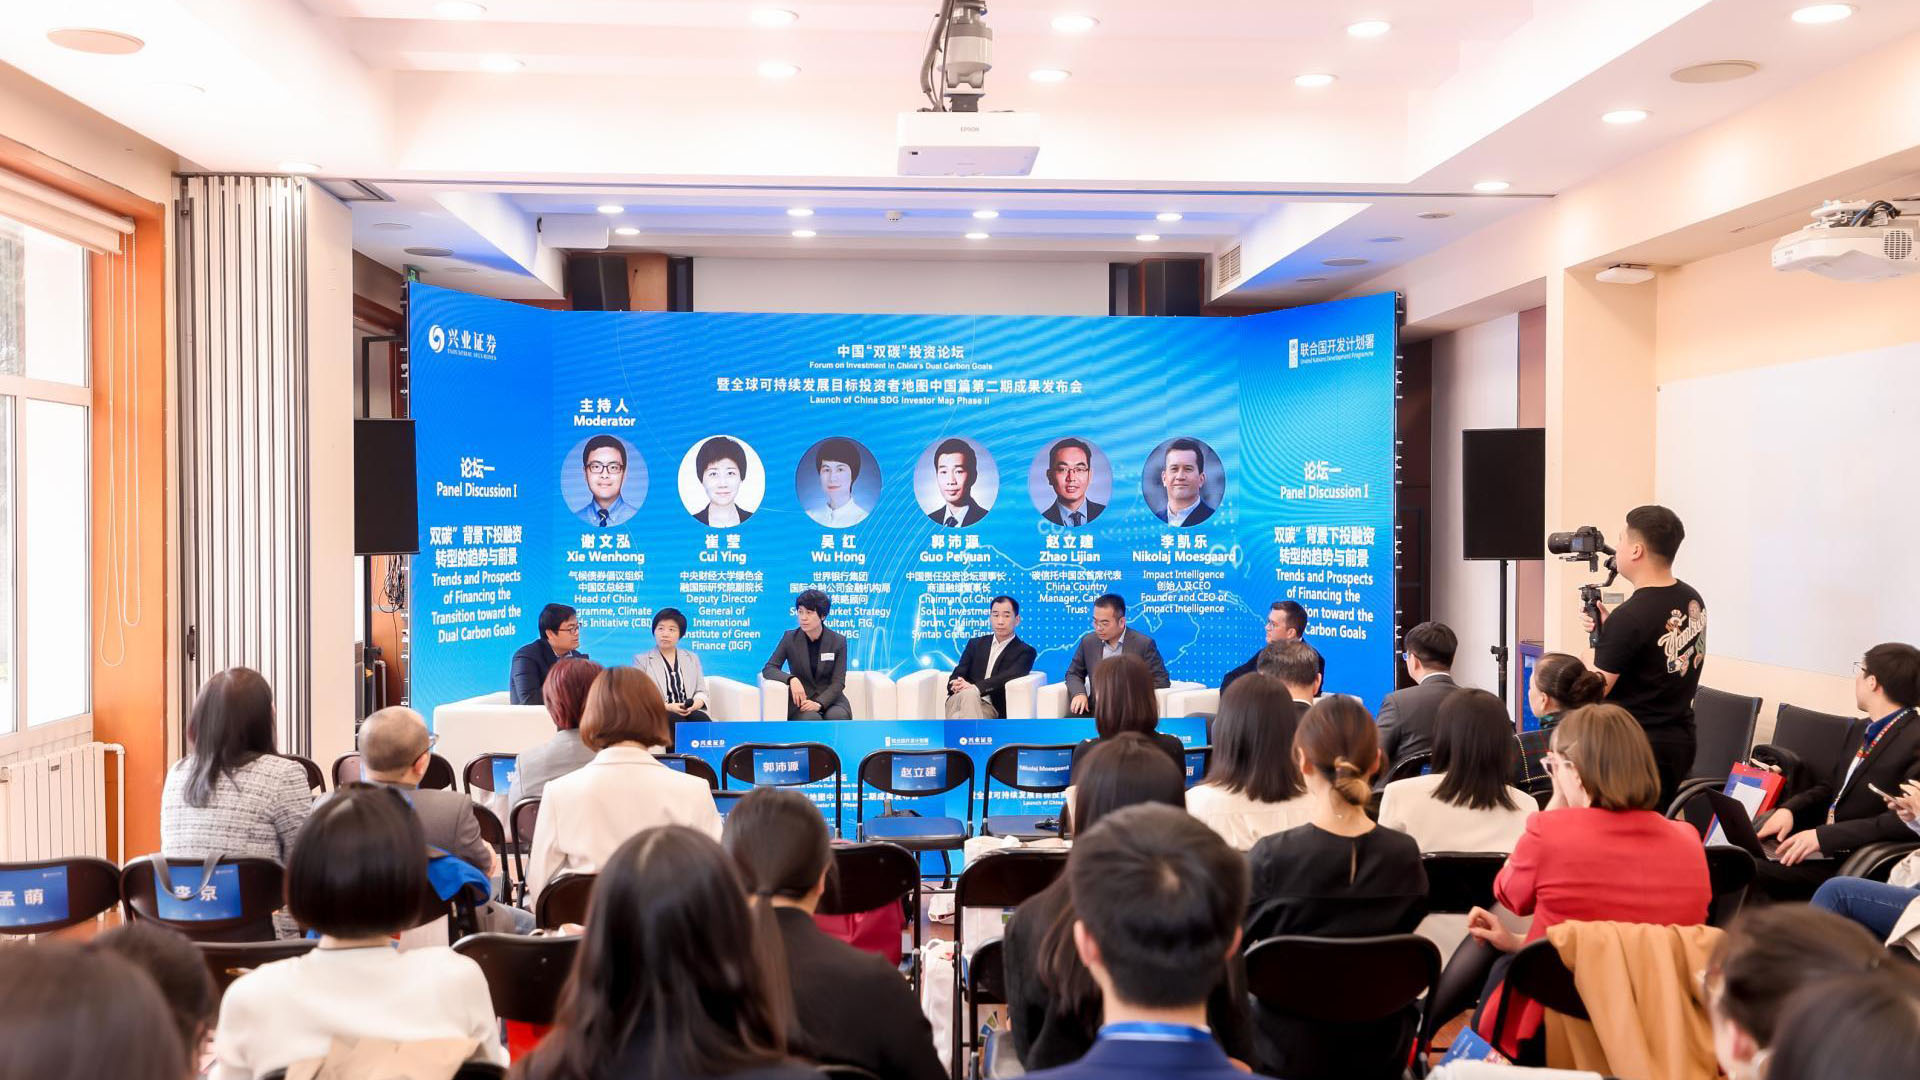 Experts engage in discussion during the launch event for the China SDG Investor Map Phase II